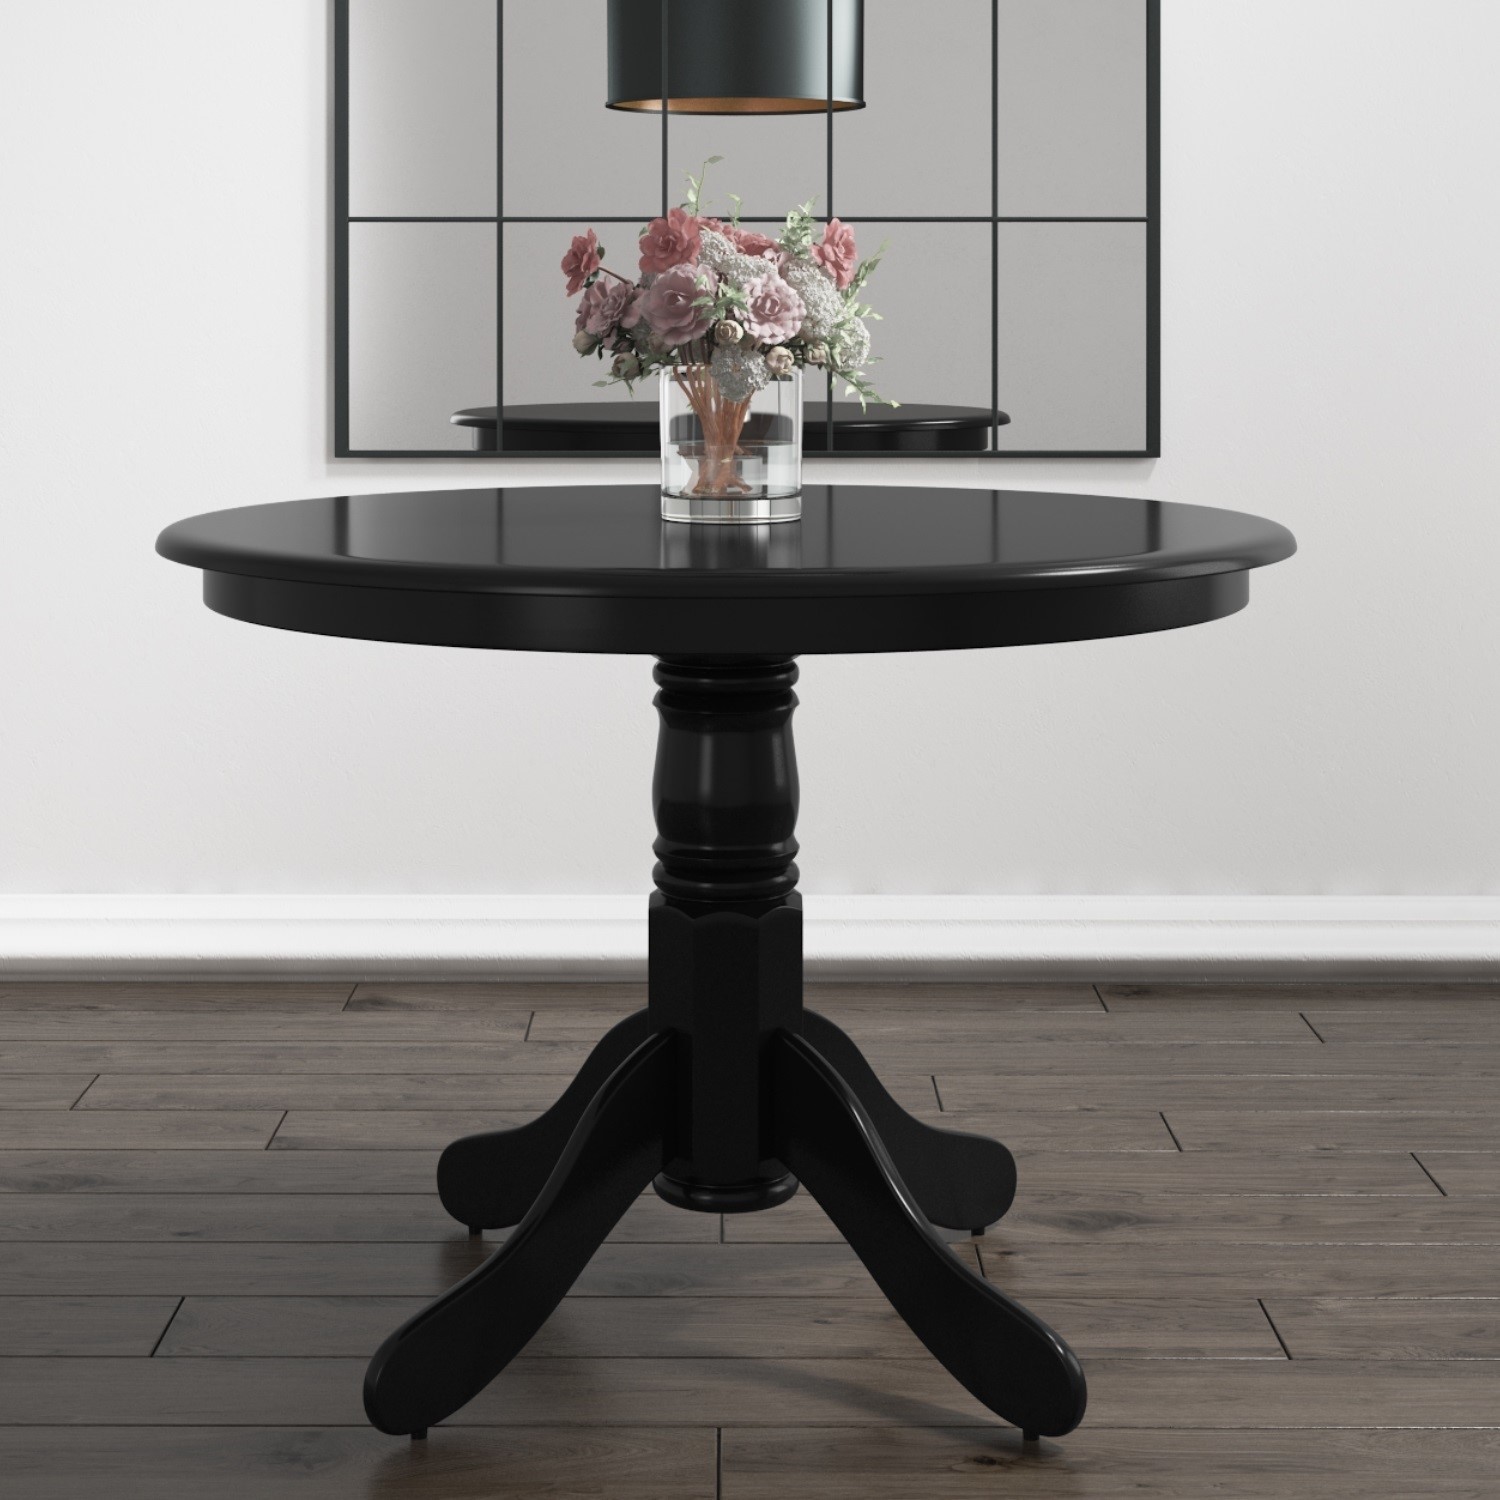 Small Round Dining Table In Black Seats 4 Rhode Island Furniture123